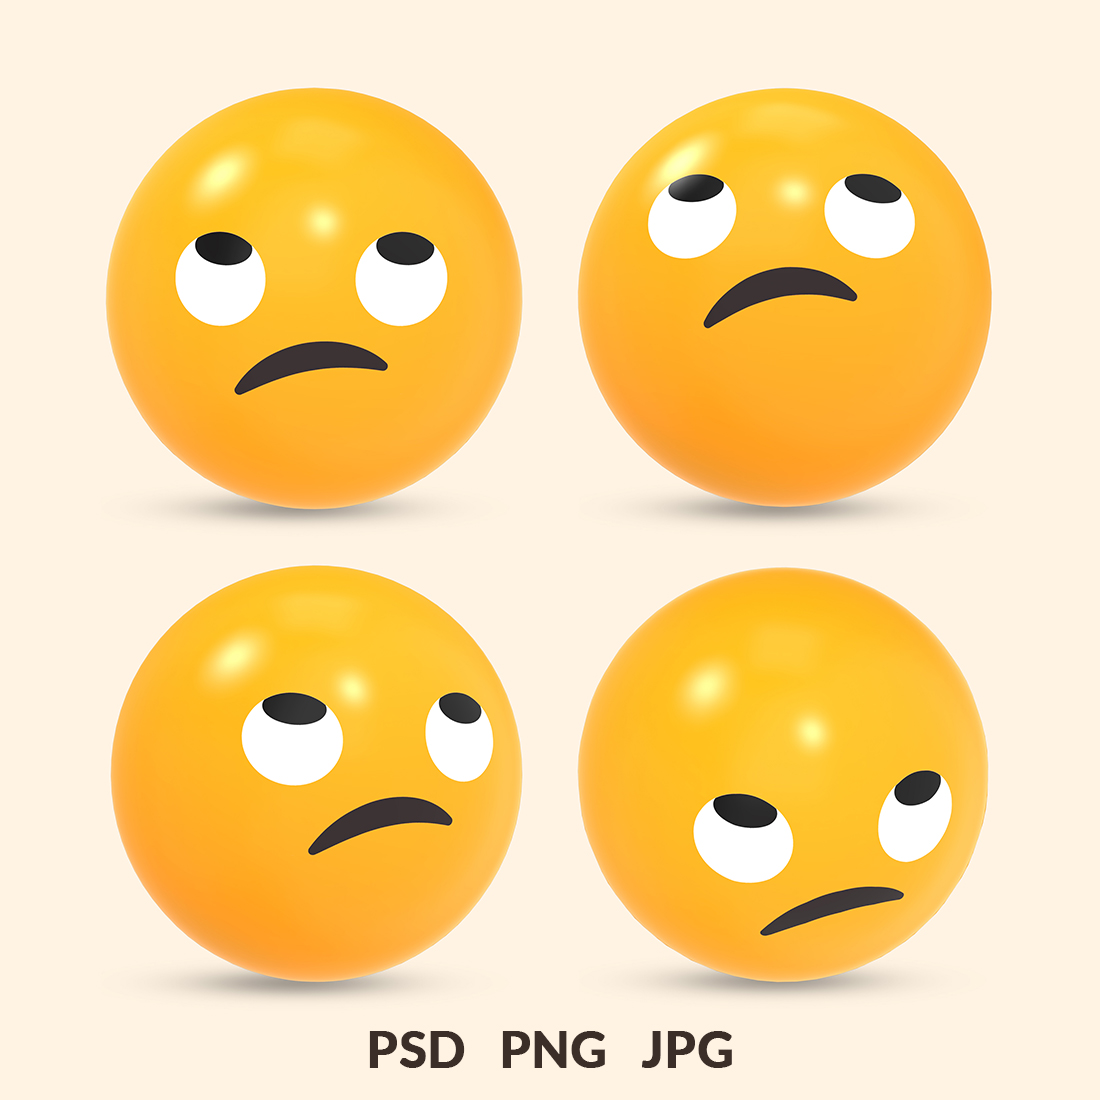 D rendered social media icon eyes rolling face or confused emoji reaction with different view